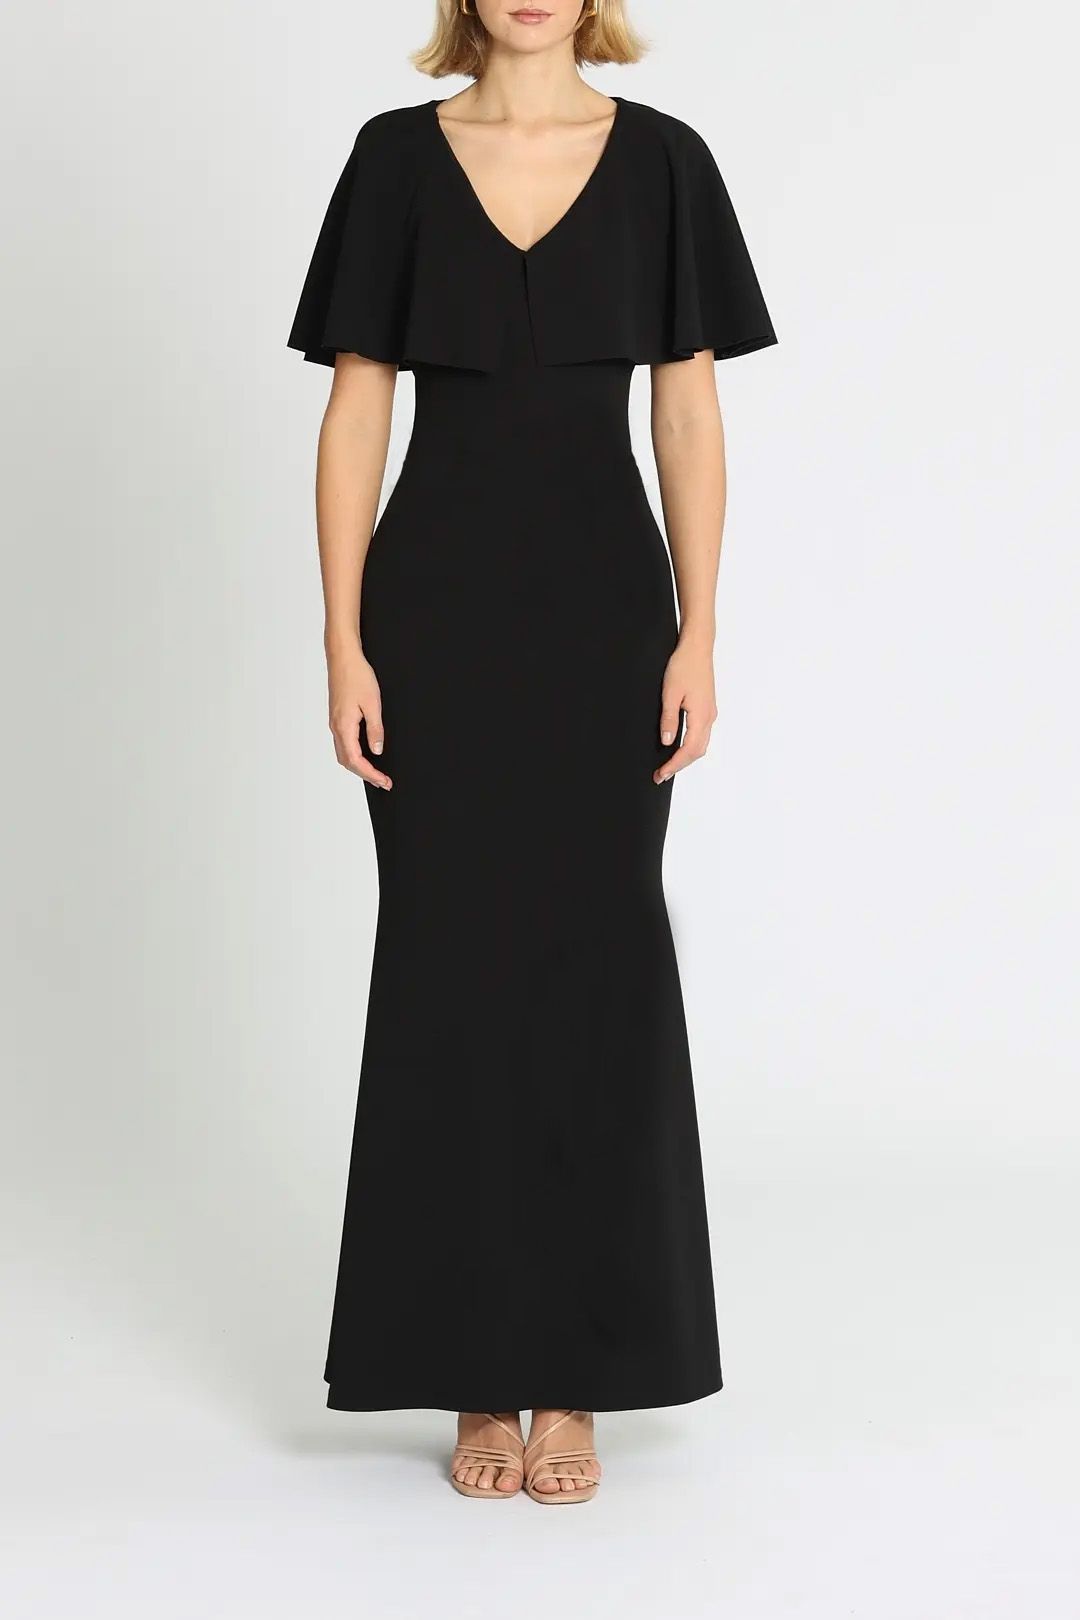 Mrs Carter Gown in Black by Pasduchas for Rent | GlamCorner